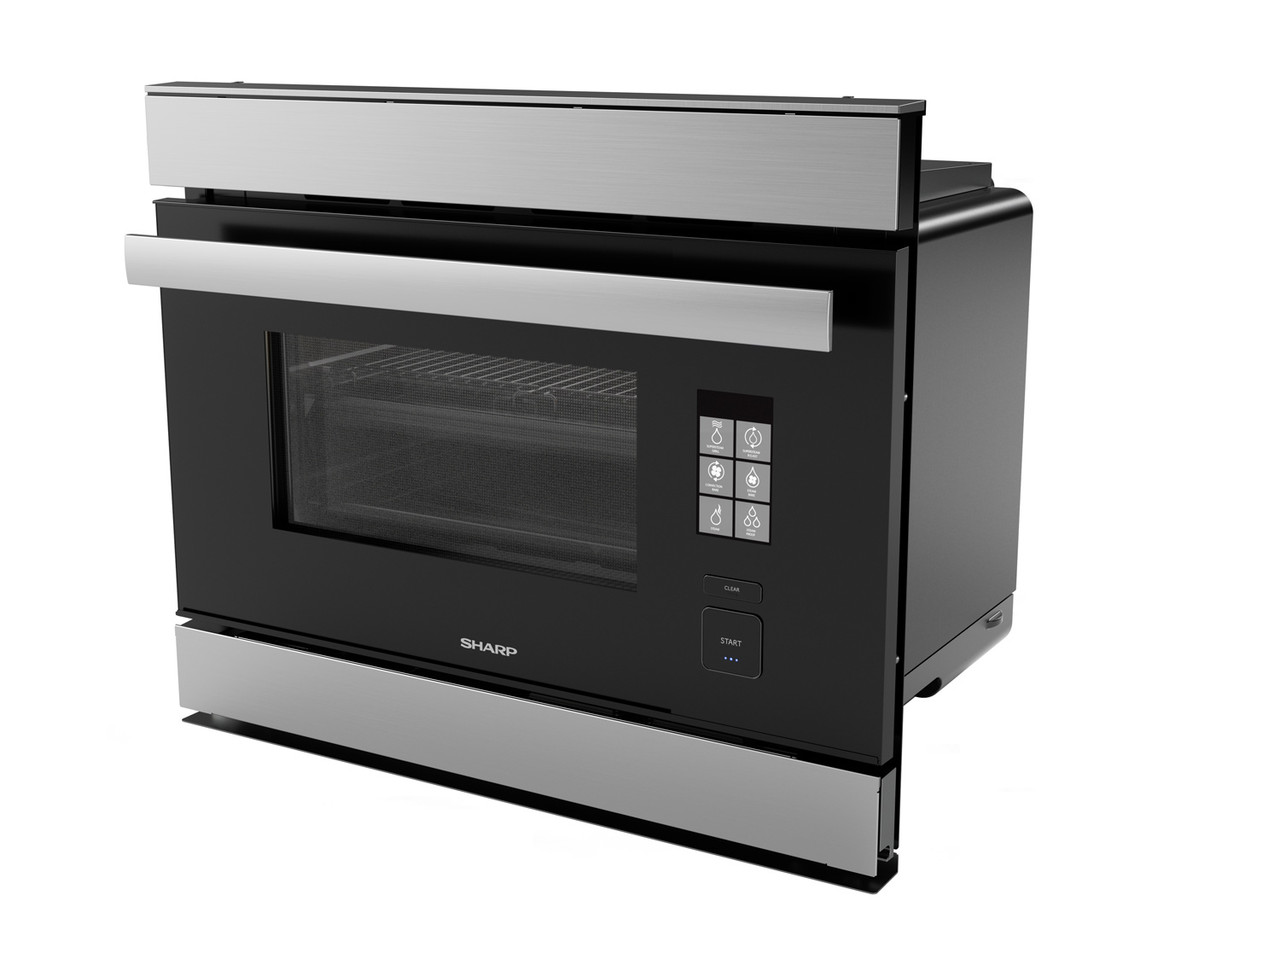 Left side view of the SuperSteam+ Smart Oven (SSC2489DS) - Sharp’s Superheated Steam Oven